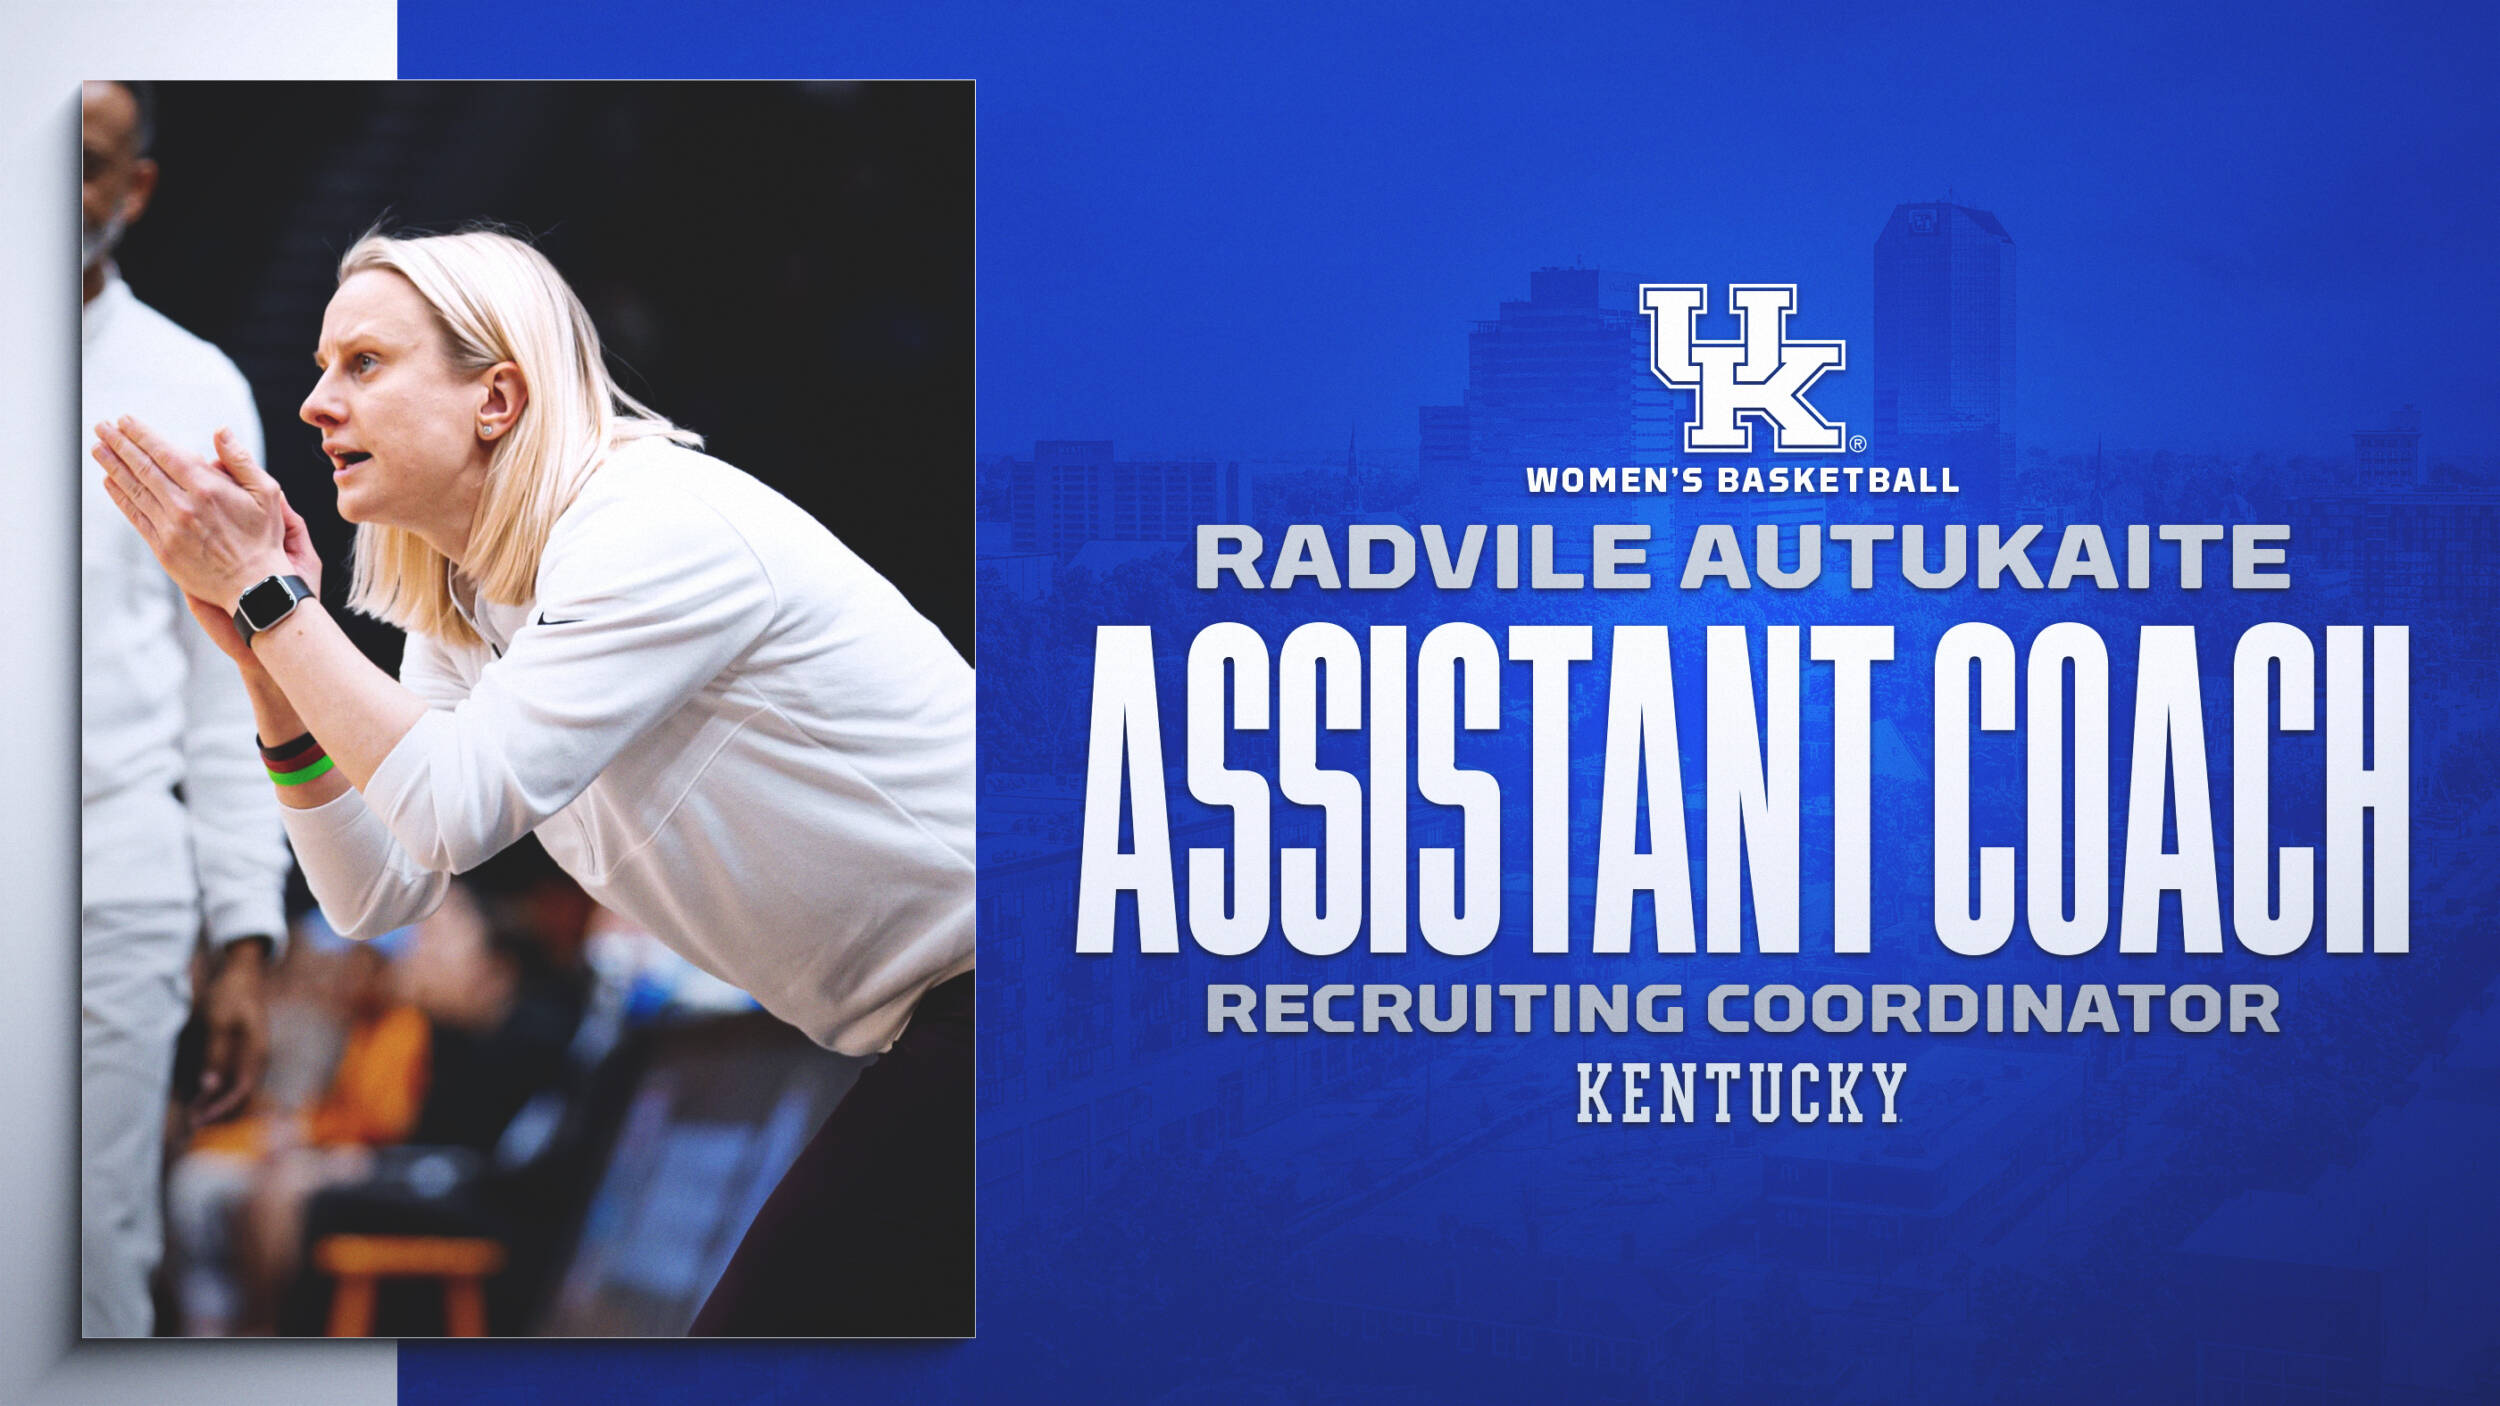 Kenny Brooks Has Hired Radvile Autukaite as an Assistant Coach, Recruiting Coordinator